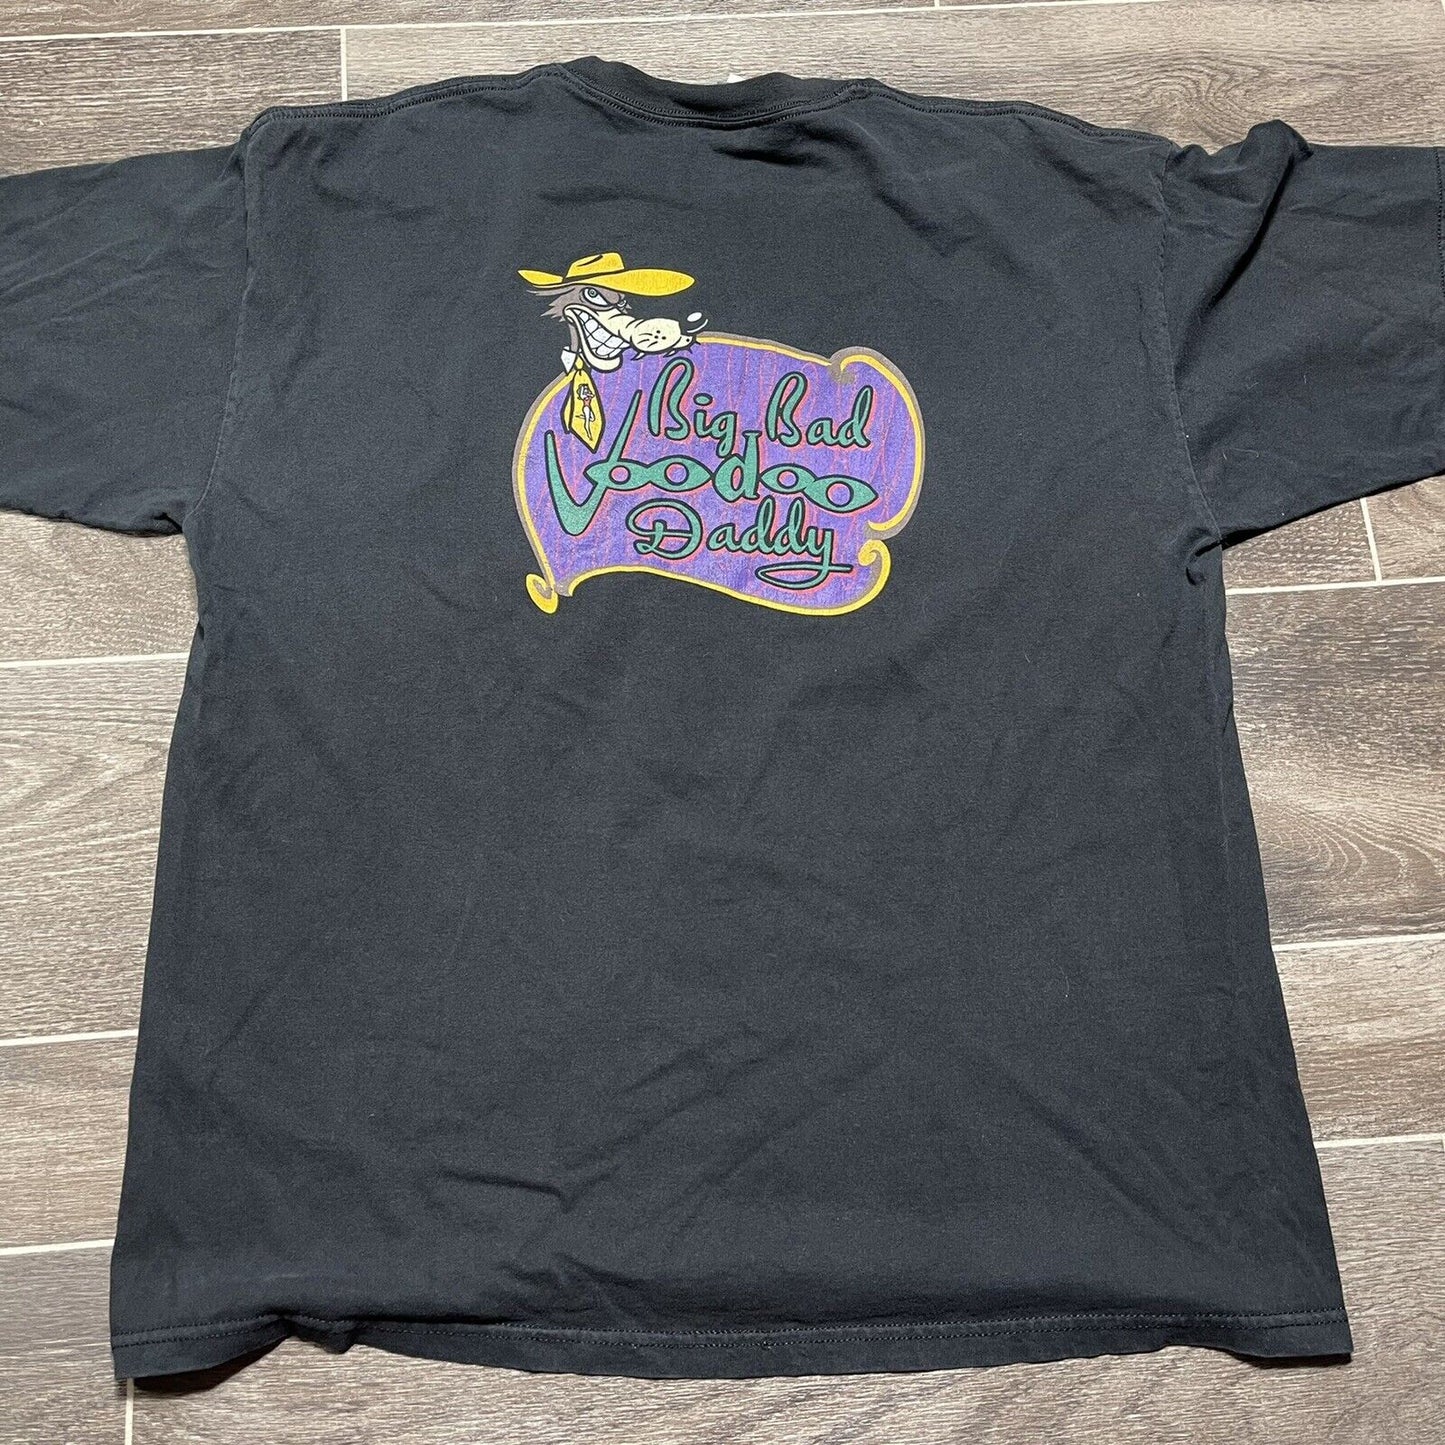 Big Bad Voodoo Daddy Size Xl Concert Shirt Preowned